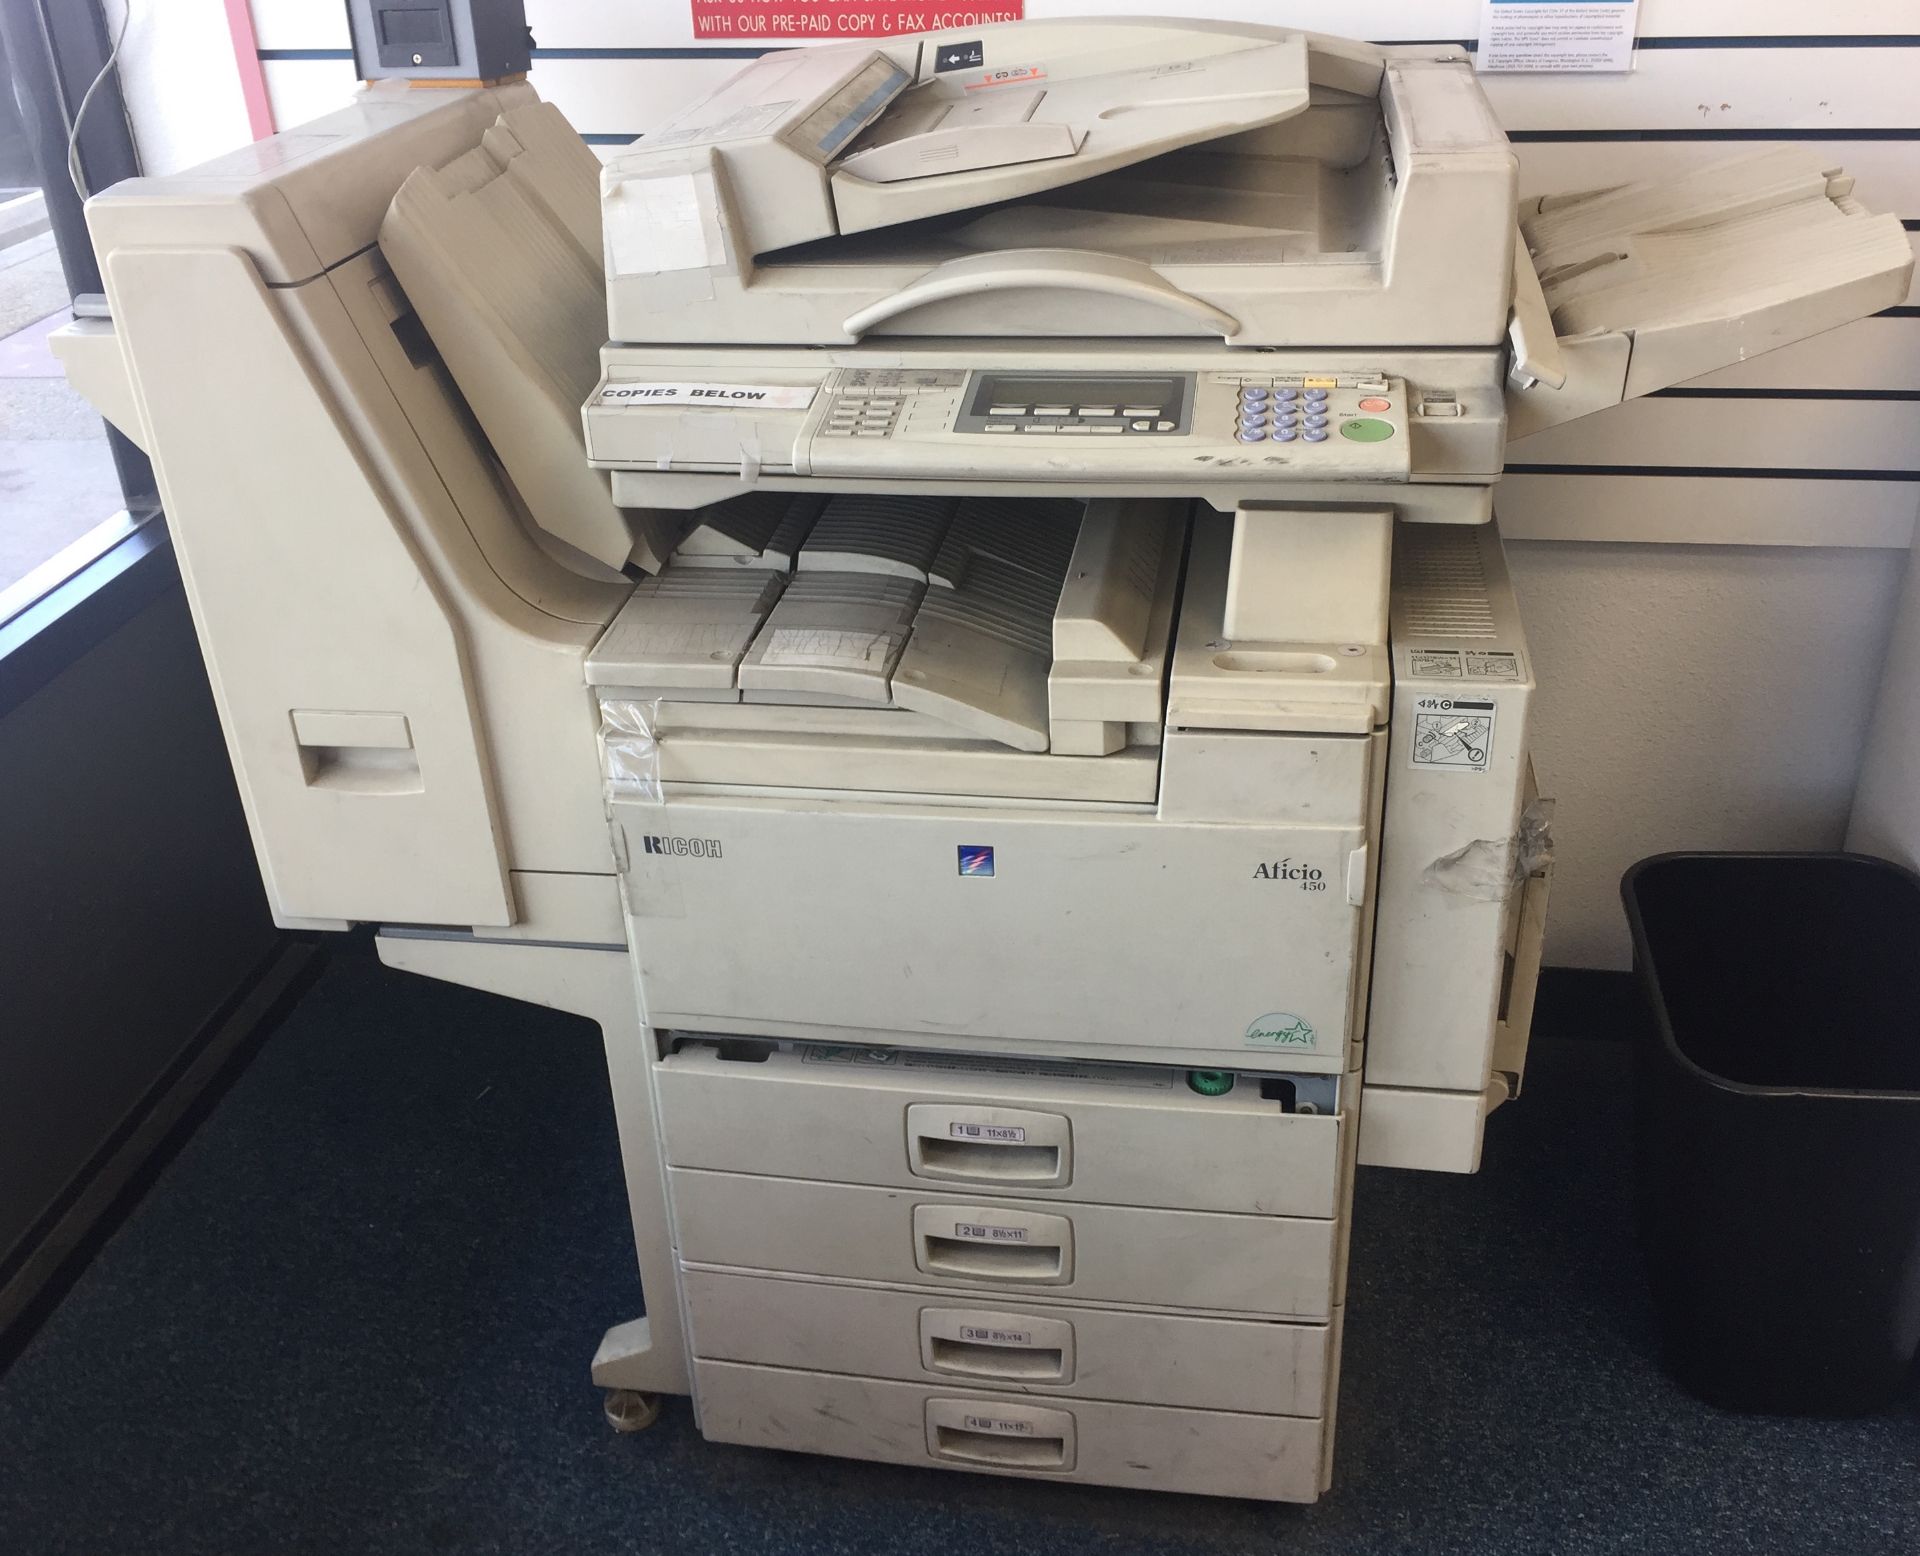 LARGE COMMERICAL PRINTER/PHOTOCOPIER FROM CLOSED UPS STORE